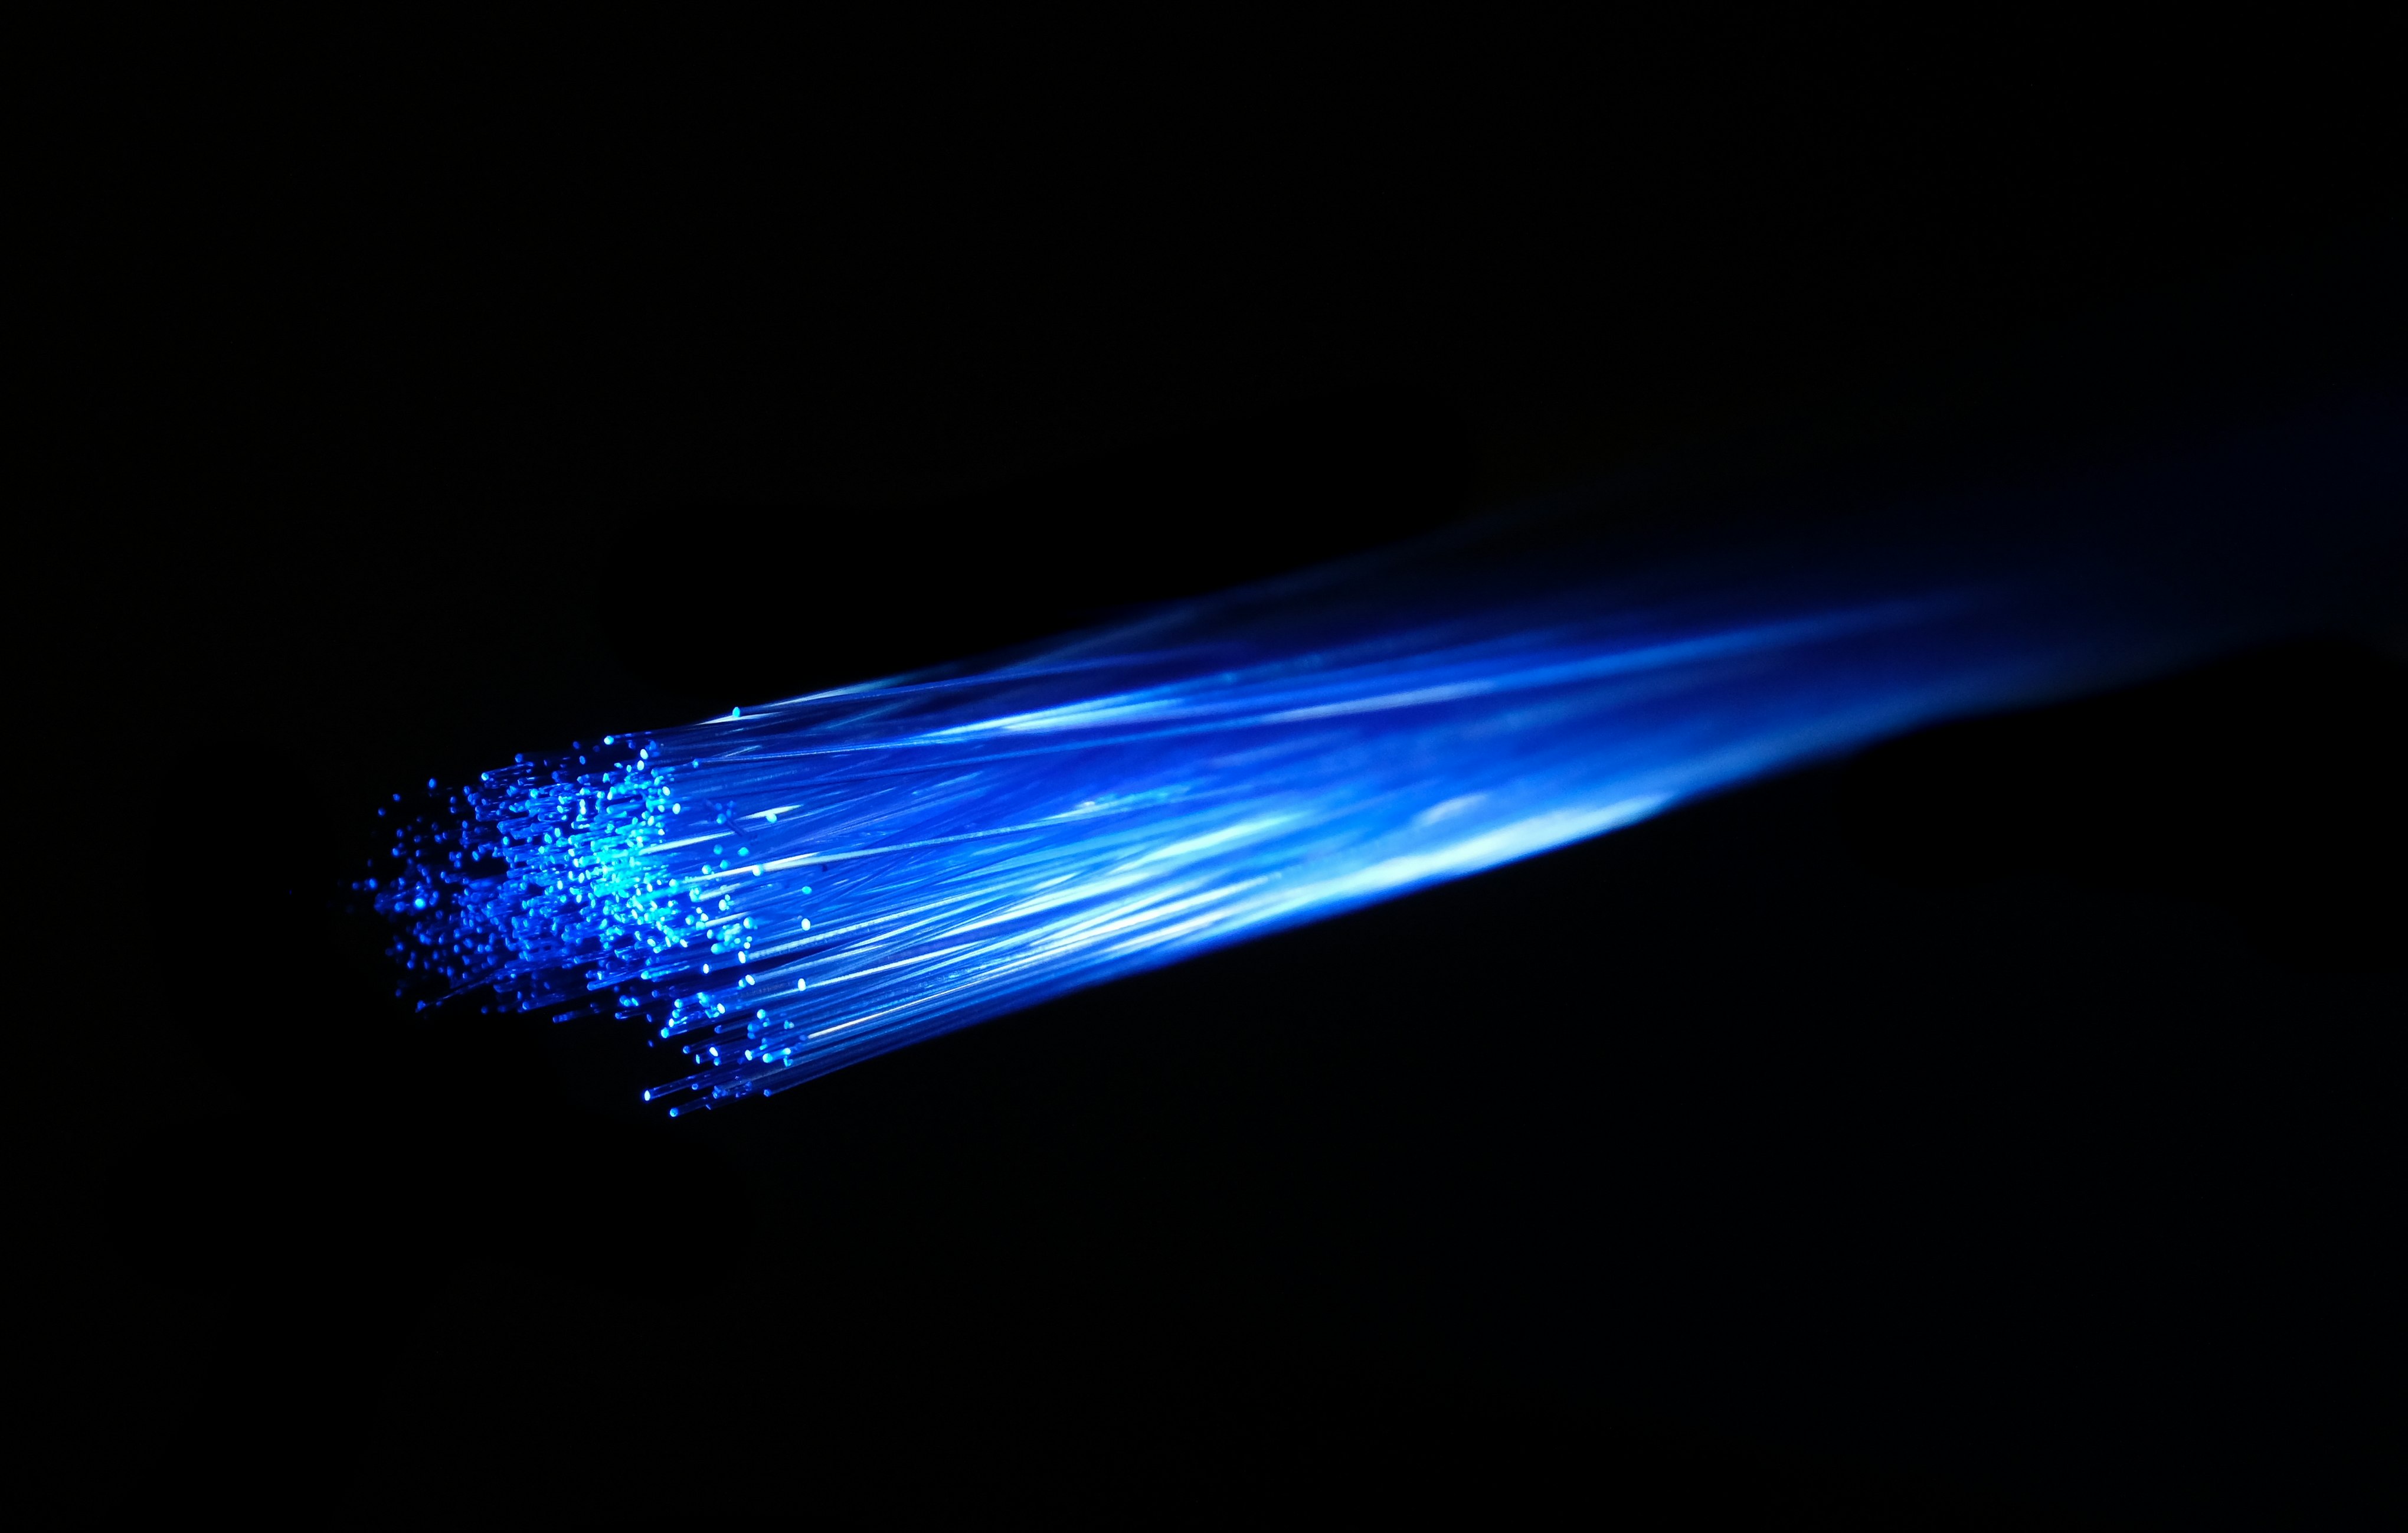 Blue light passing over fibre optic cable. The fiber optic is very vivid and striking. Ideal image for depicting superfast gigabit fibre broadband, networks, networking and other internet technology.